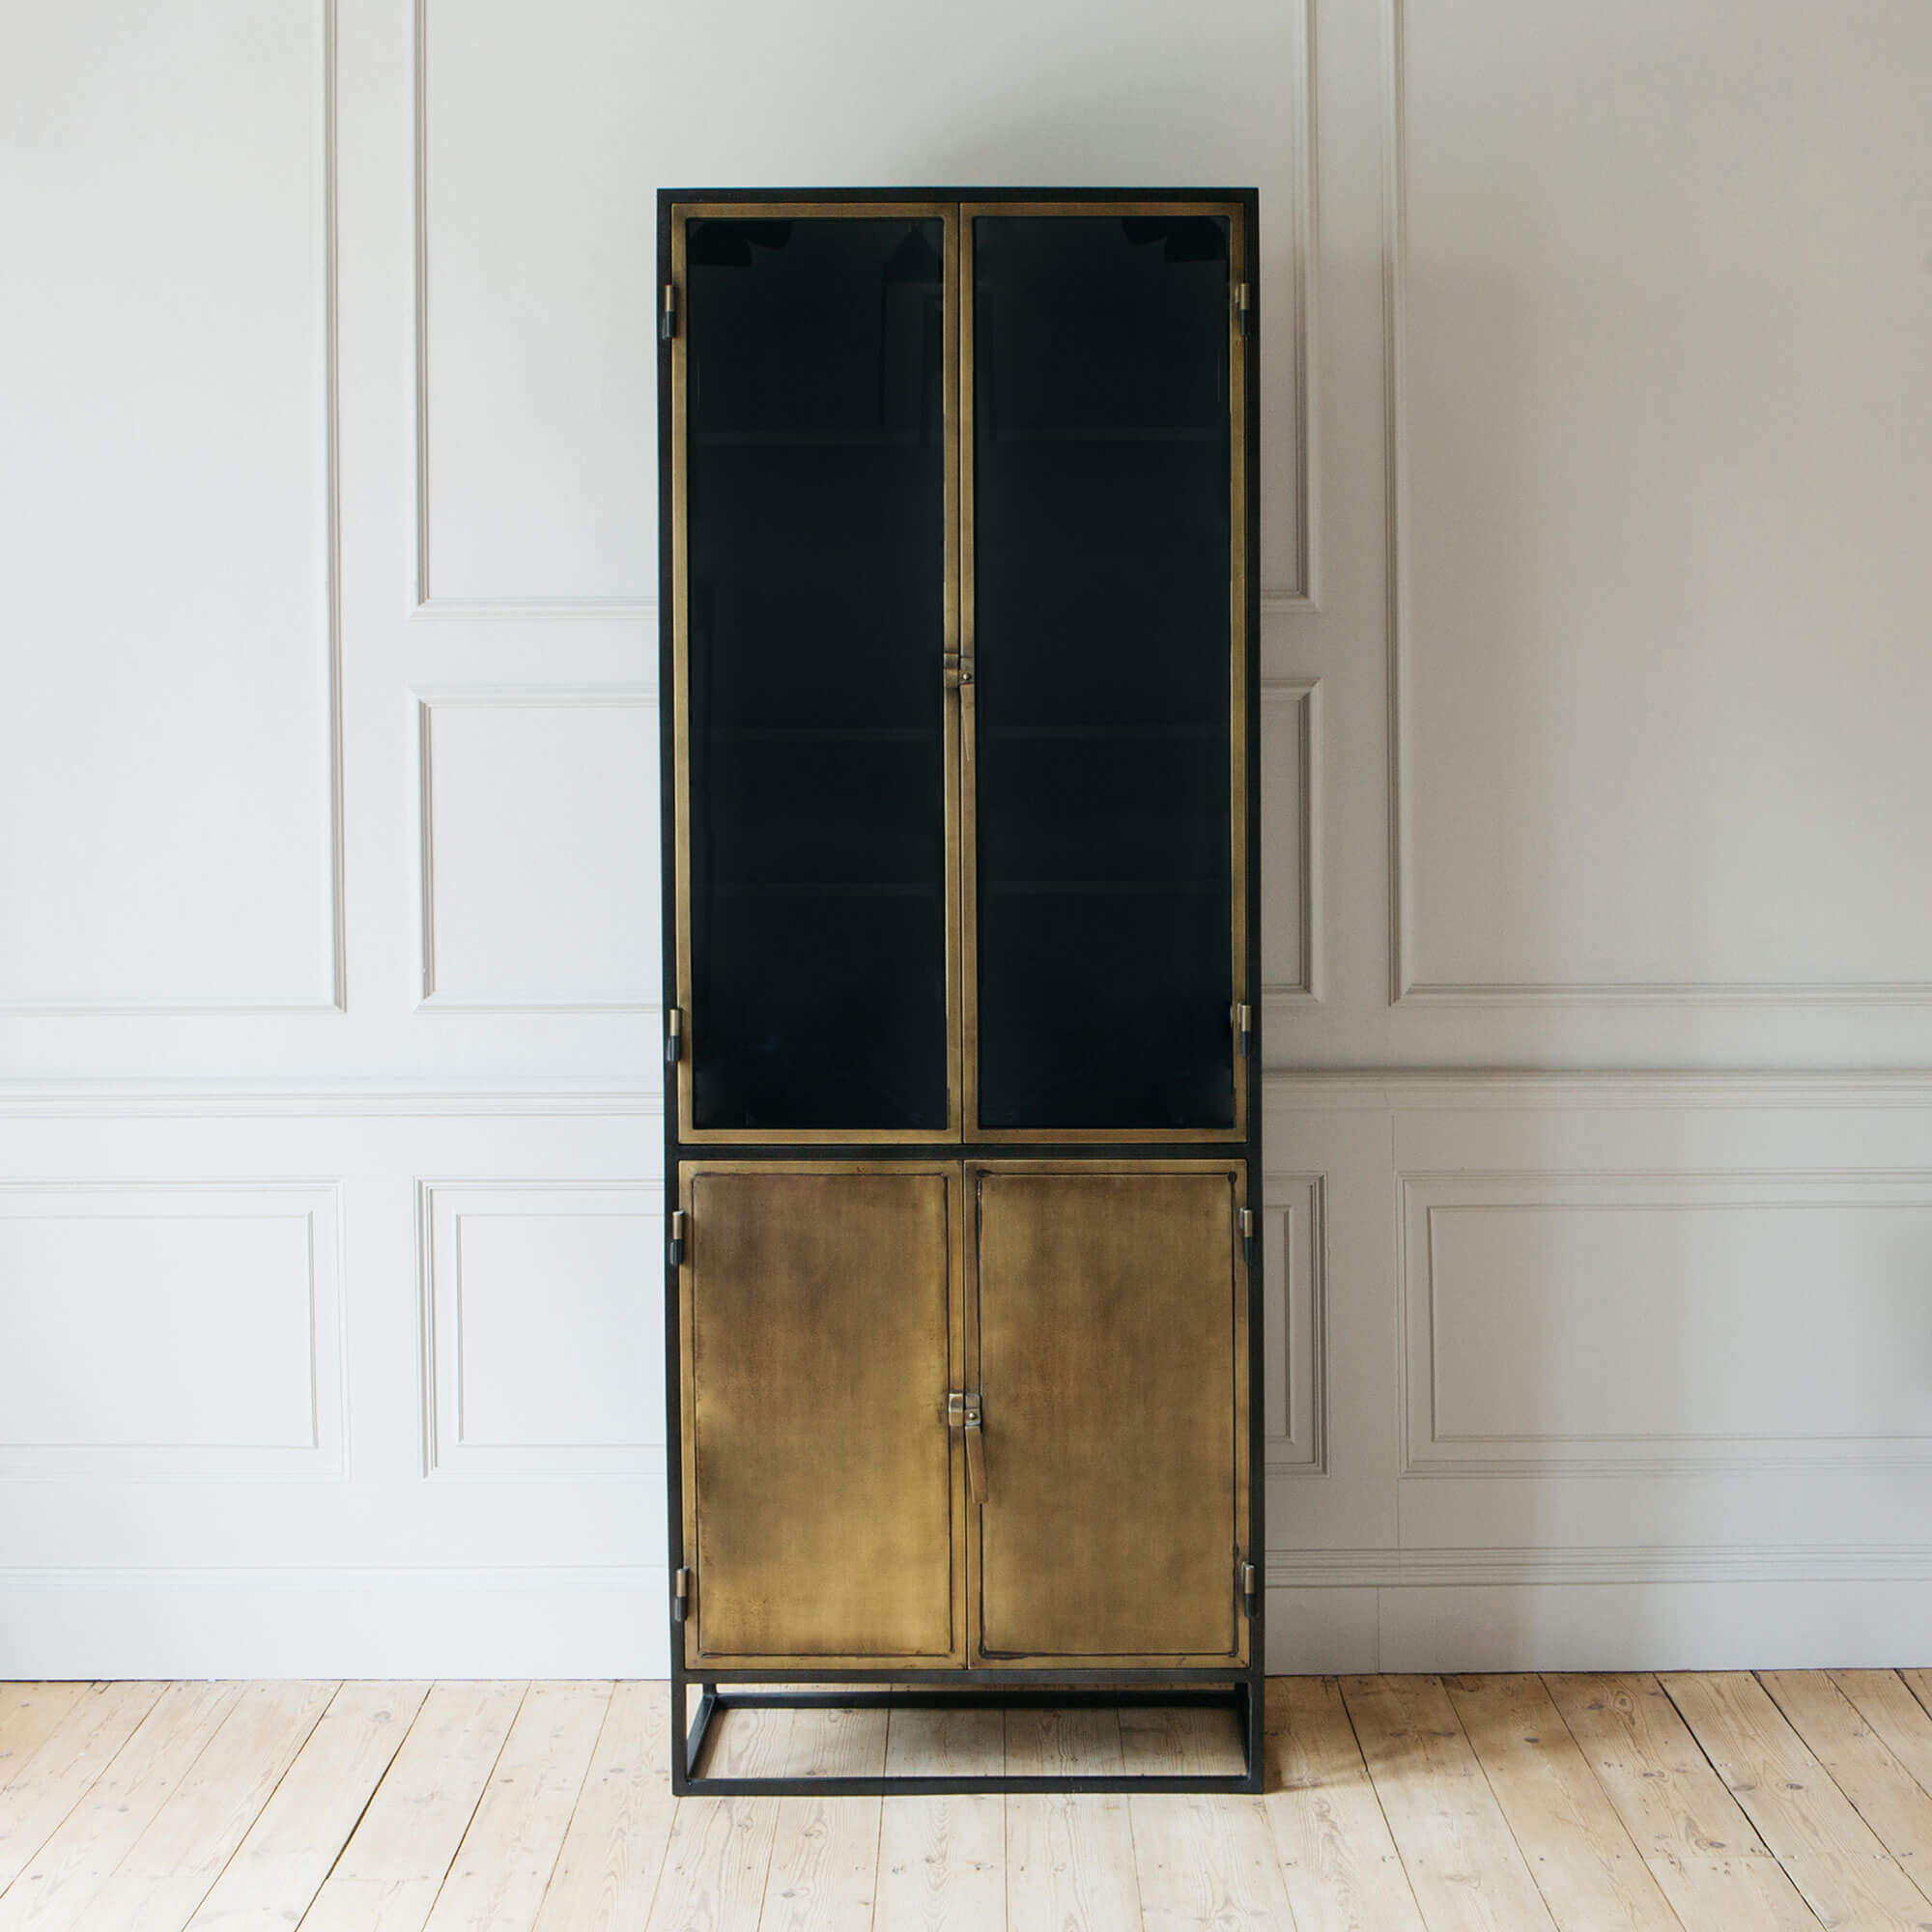 Read more about Graham and green dexter double glass cabinet